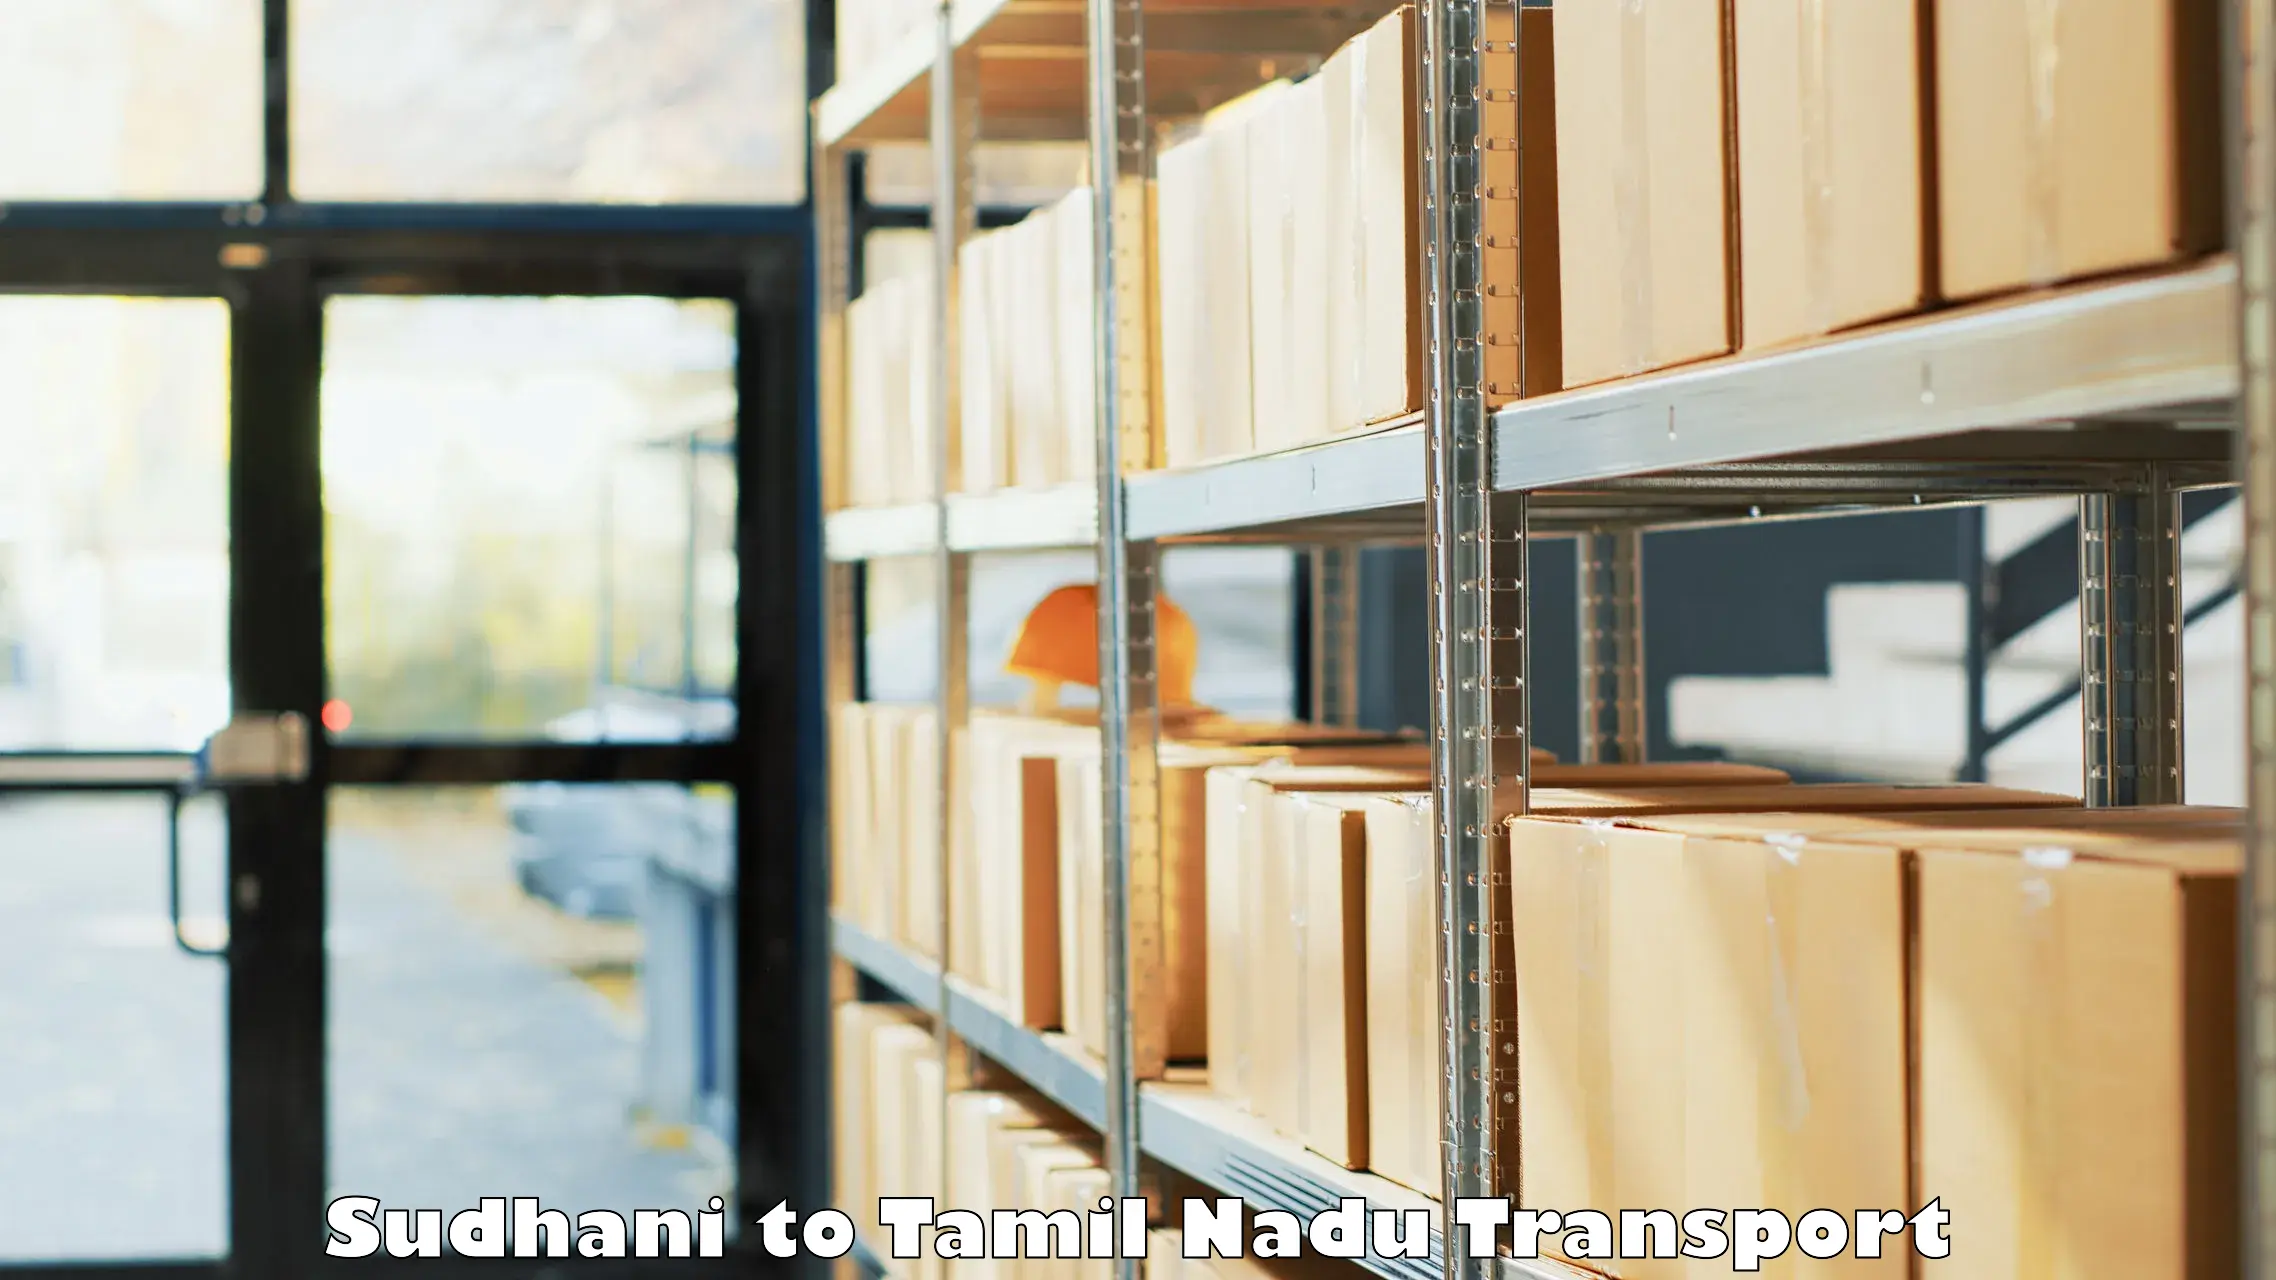 Commercial transport service Sudhani to Tamil Nadu